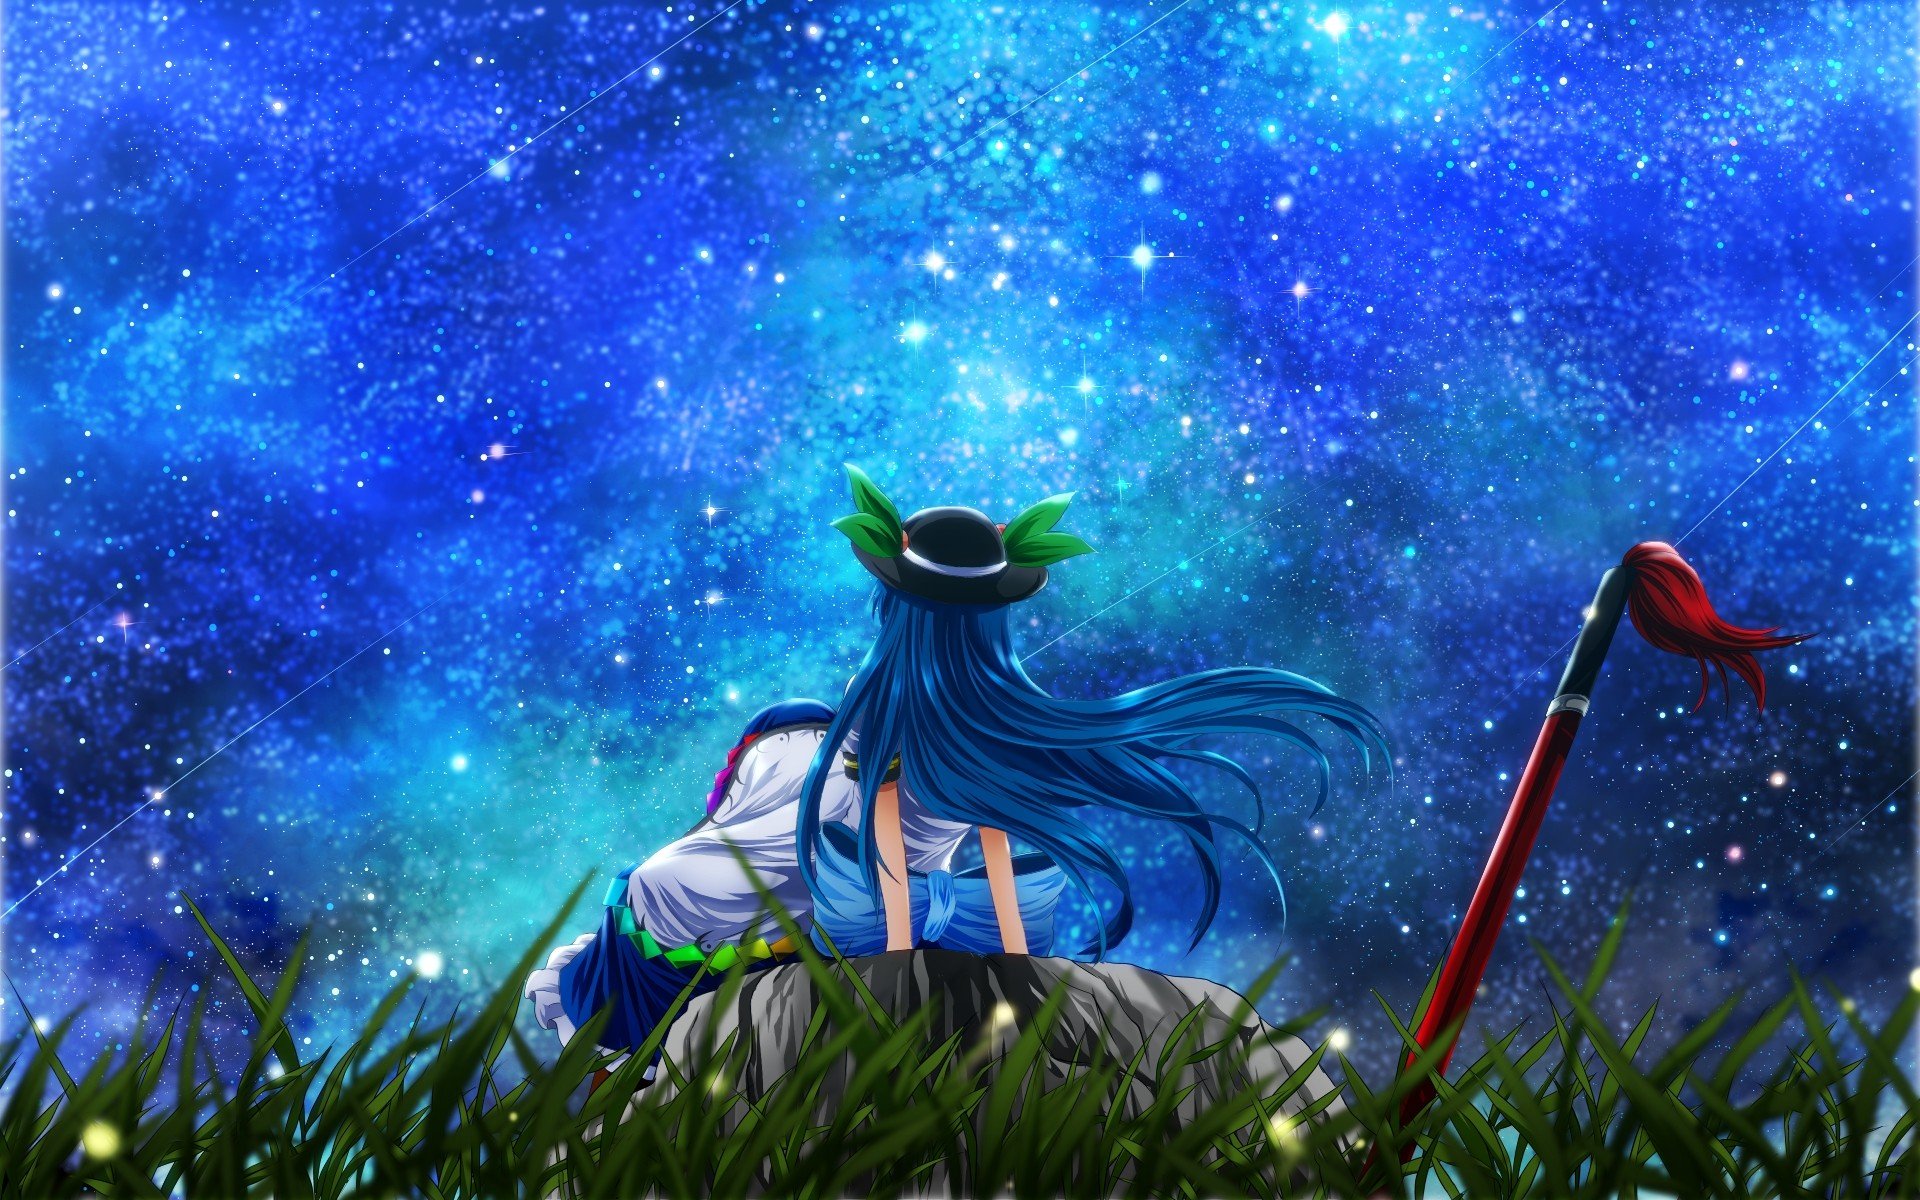 video, Games, Touhou, Dress, Night, Stars, Leaves, Grass, Stones, Long, Hair, Weapons, Blue, Hair, Bows, Sitting, Aprons, Hinanawi, Tenshi, Skyscapes, Hats, Sword, Of, Hisou, Swords, Nekominase Wallpaper